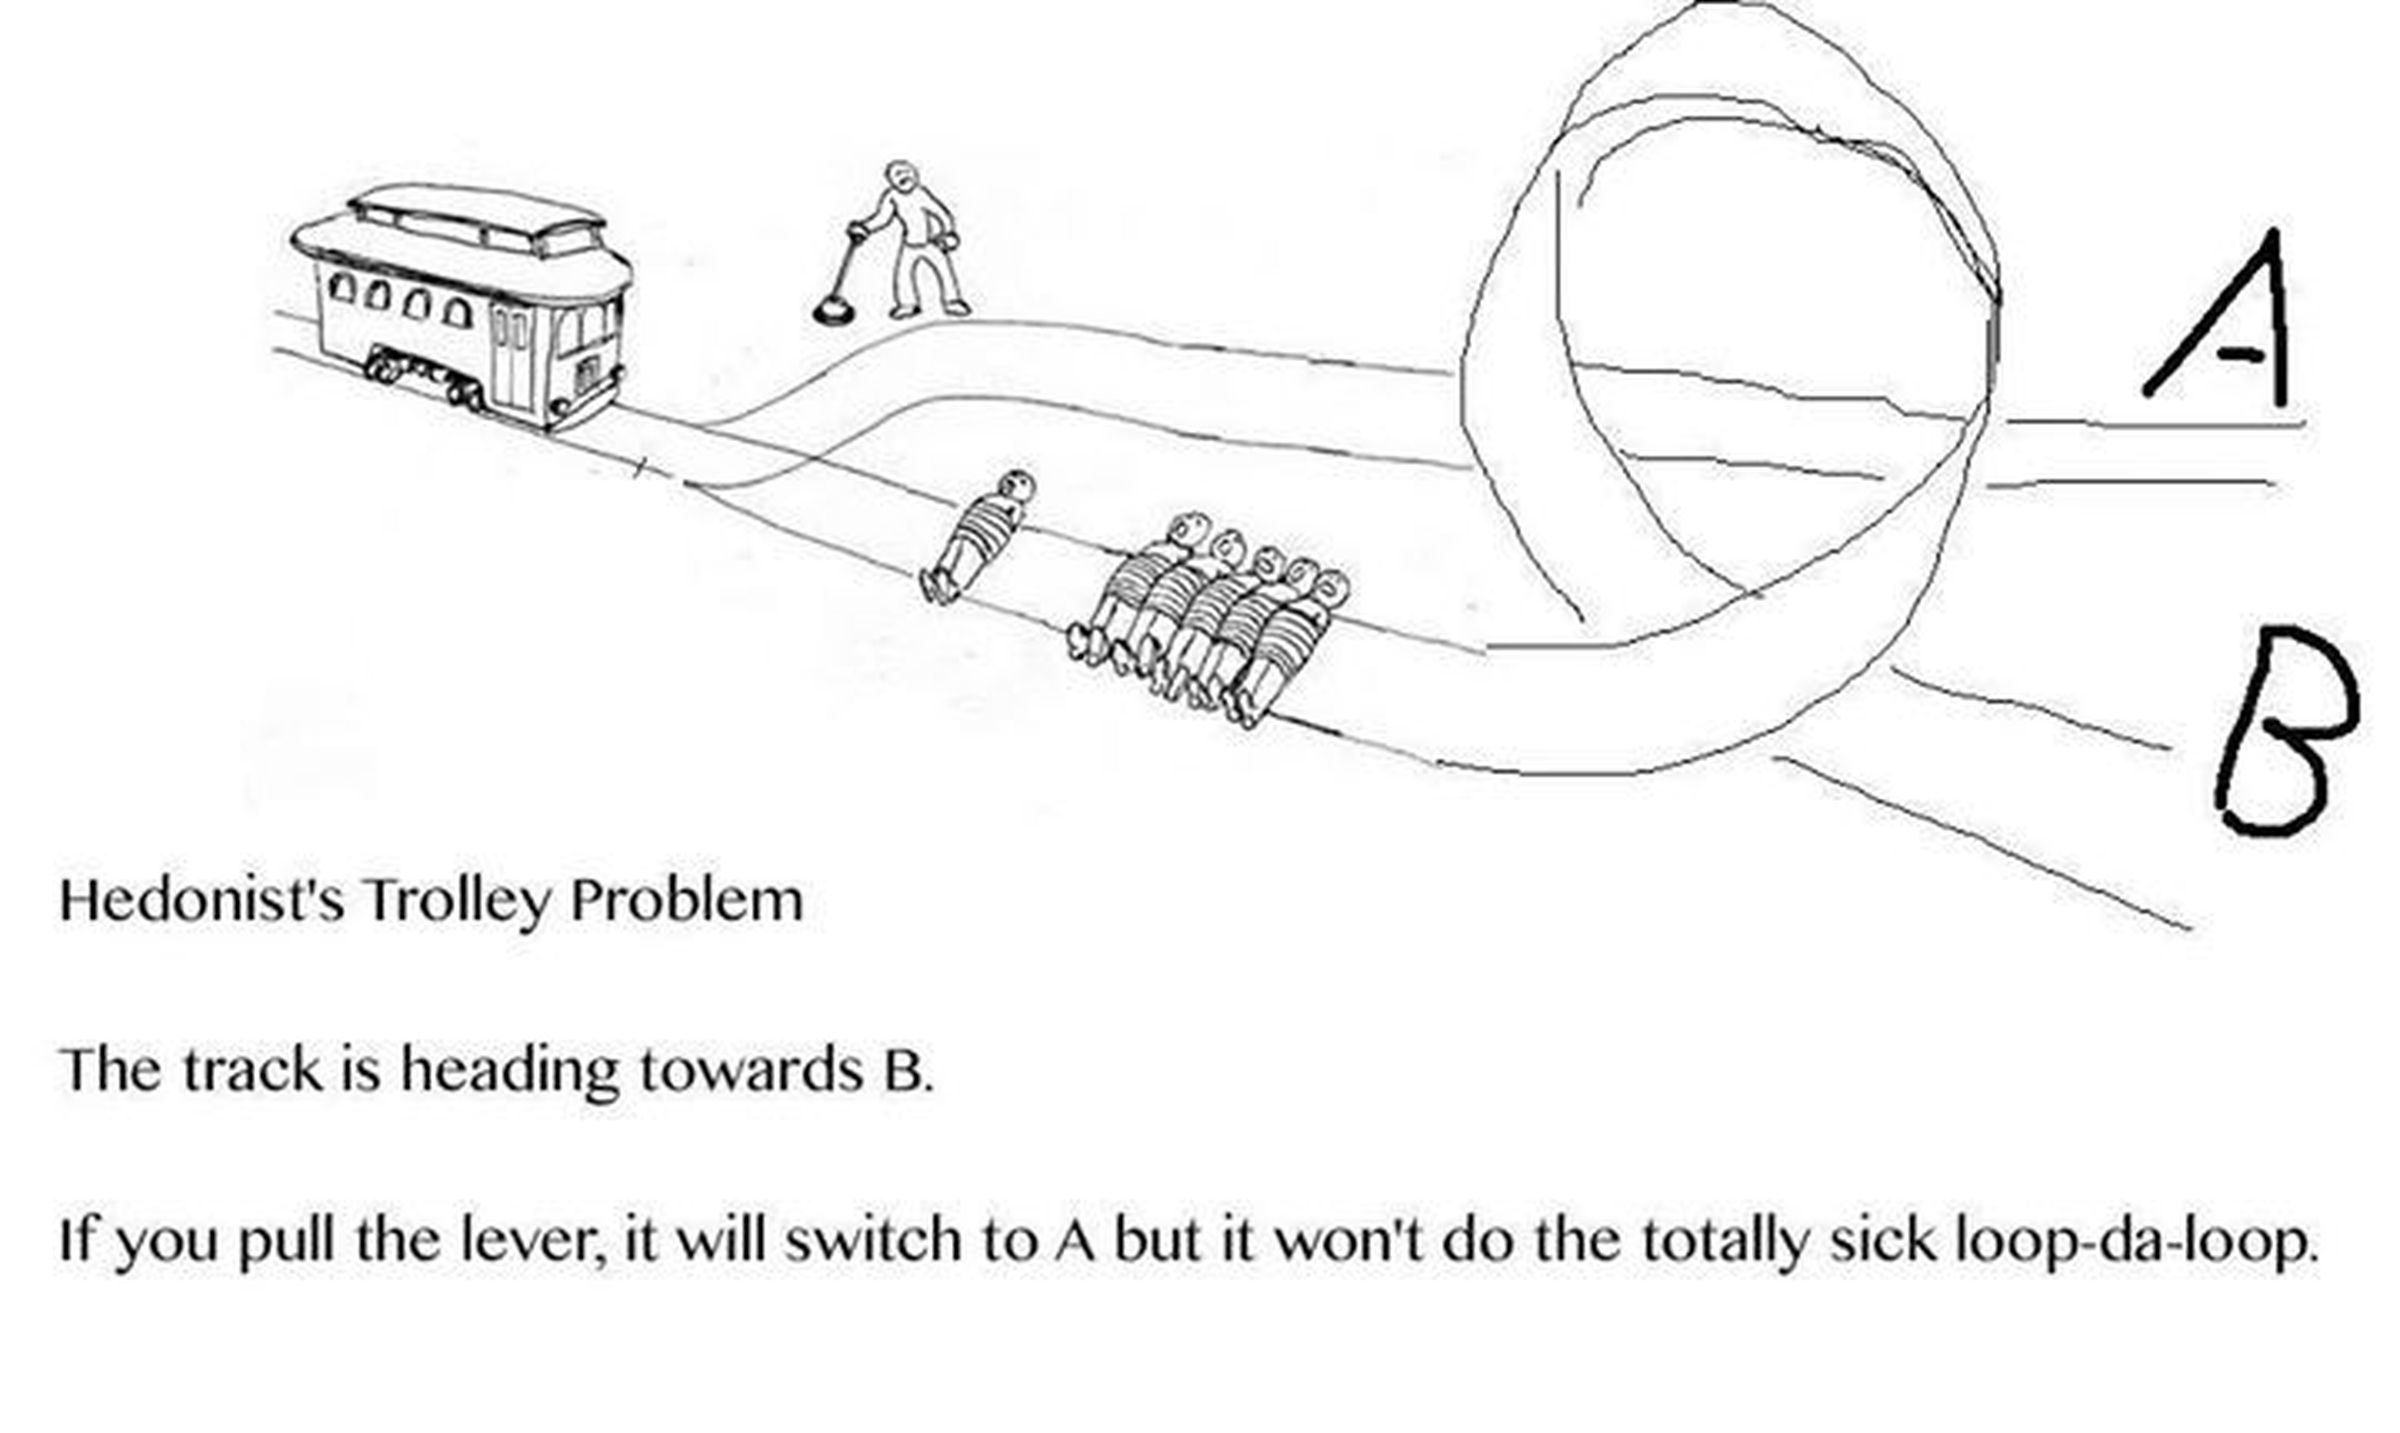 Hedonist's Trolley Problem